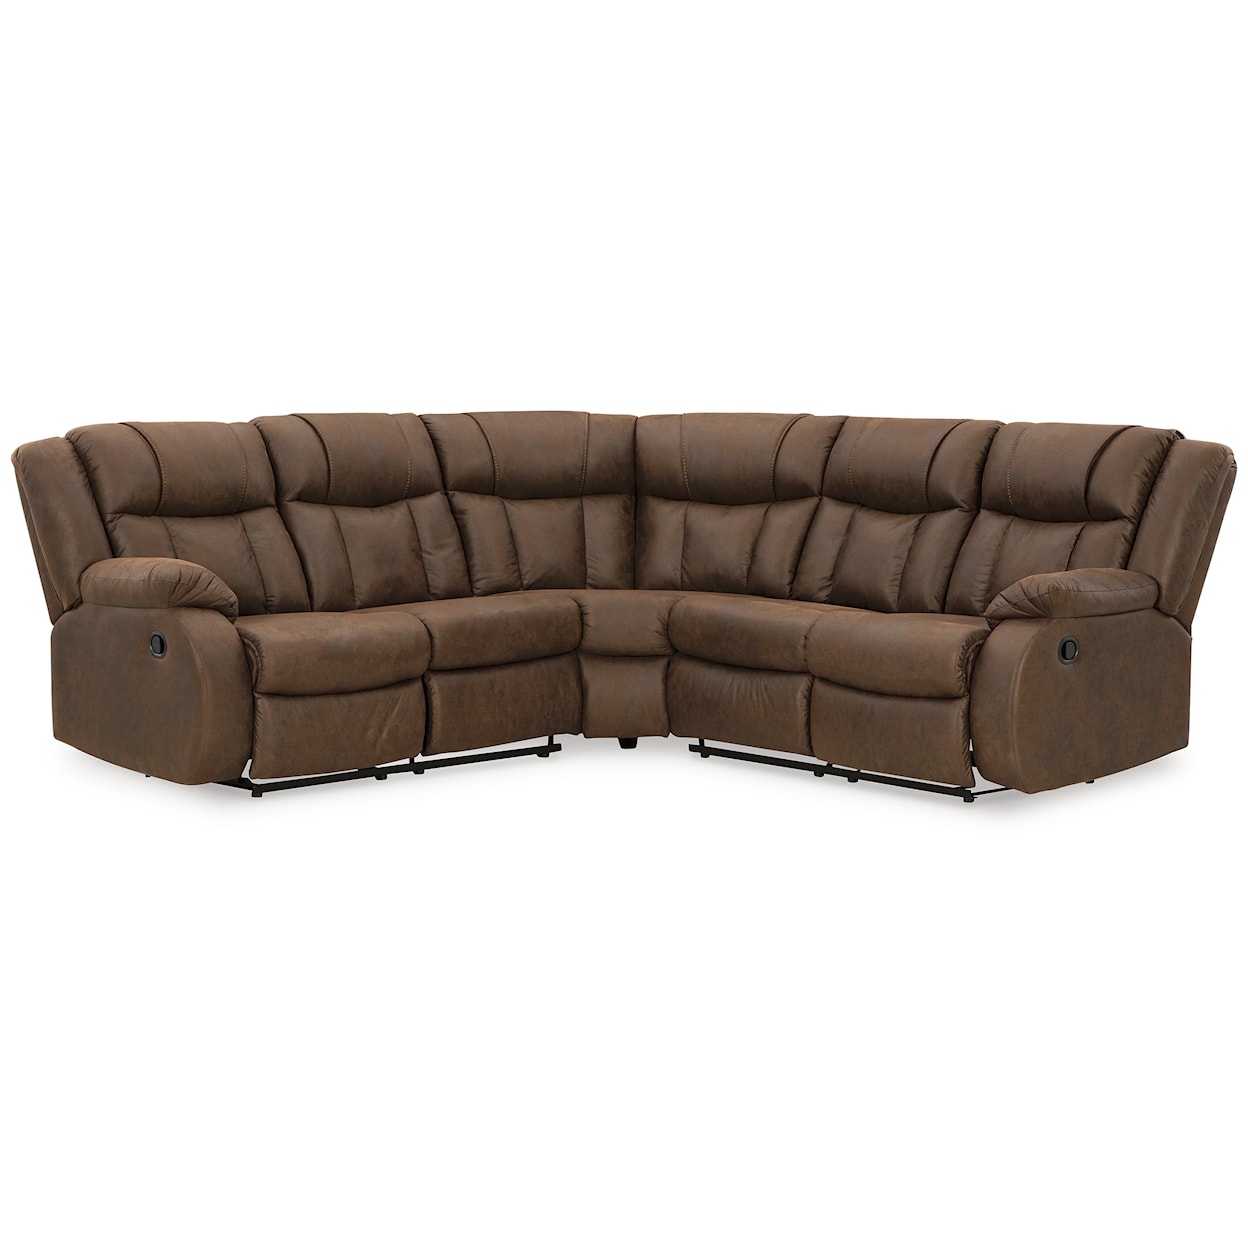 Signature Design by Ashley Trail Boys Reclining Sectional Sofa